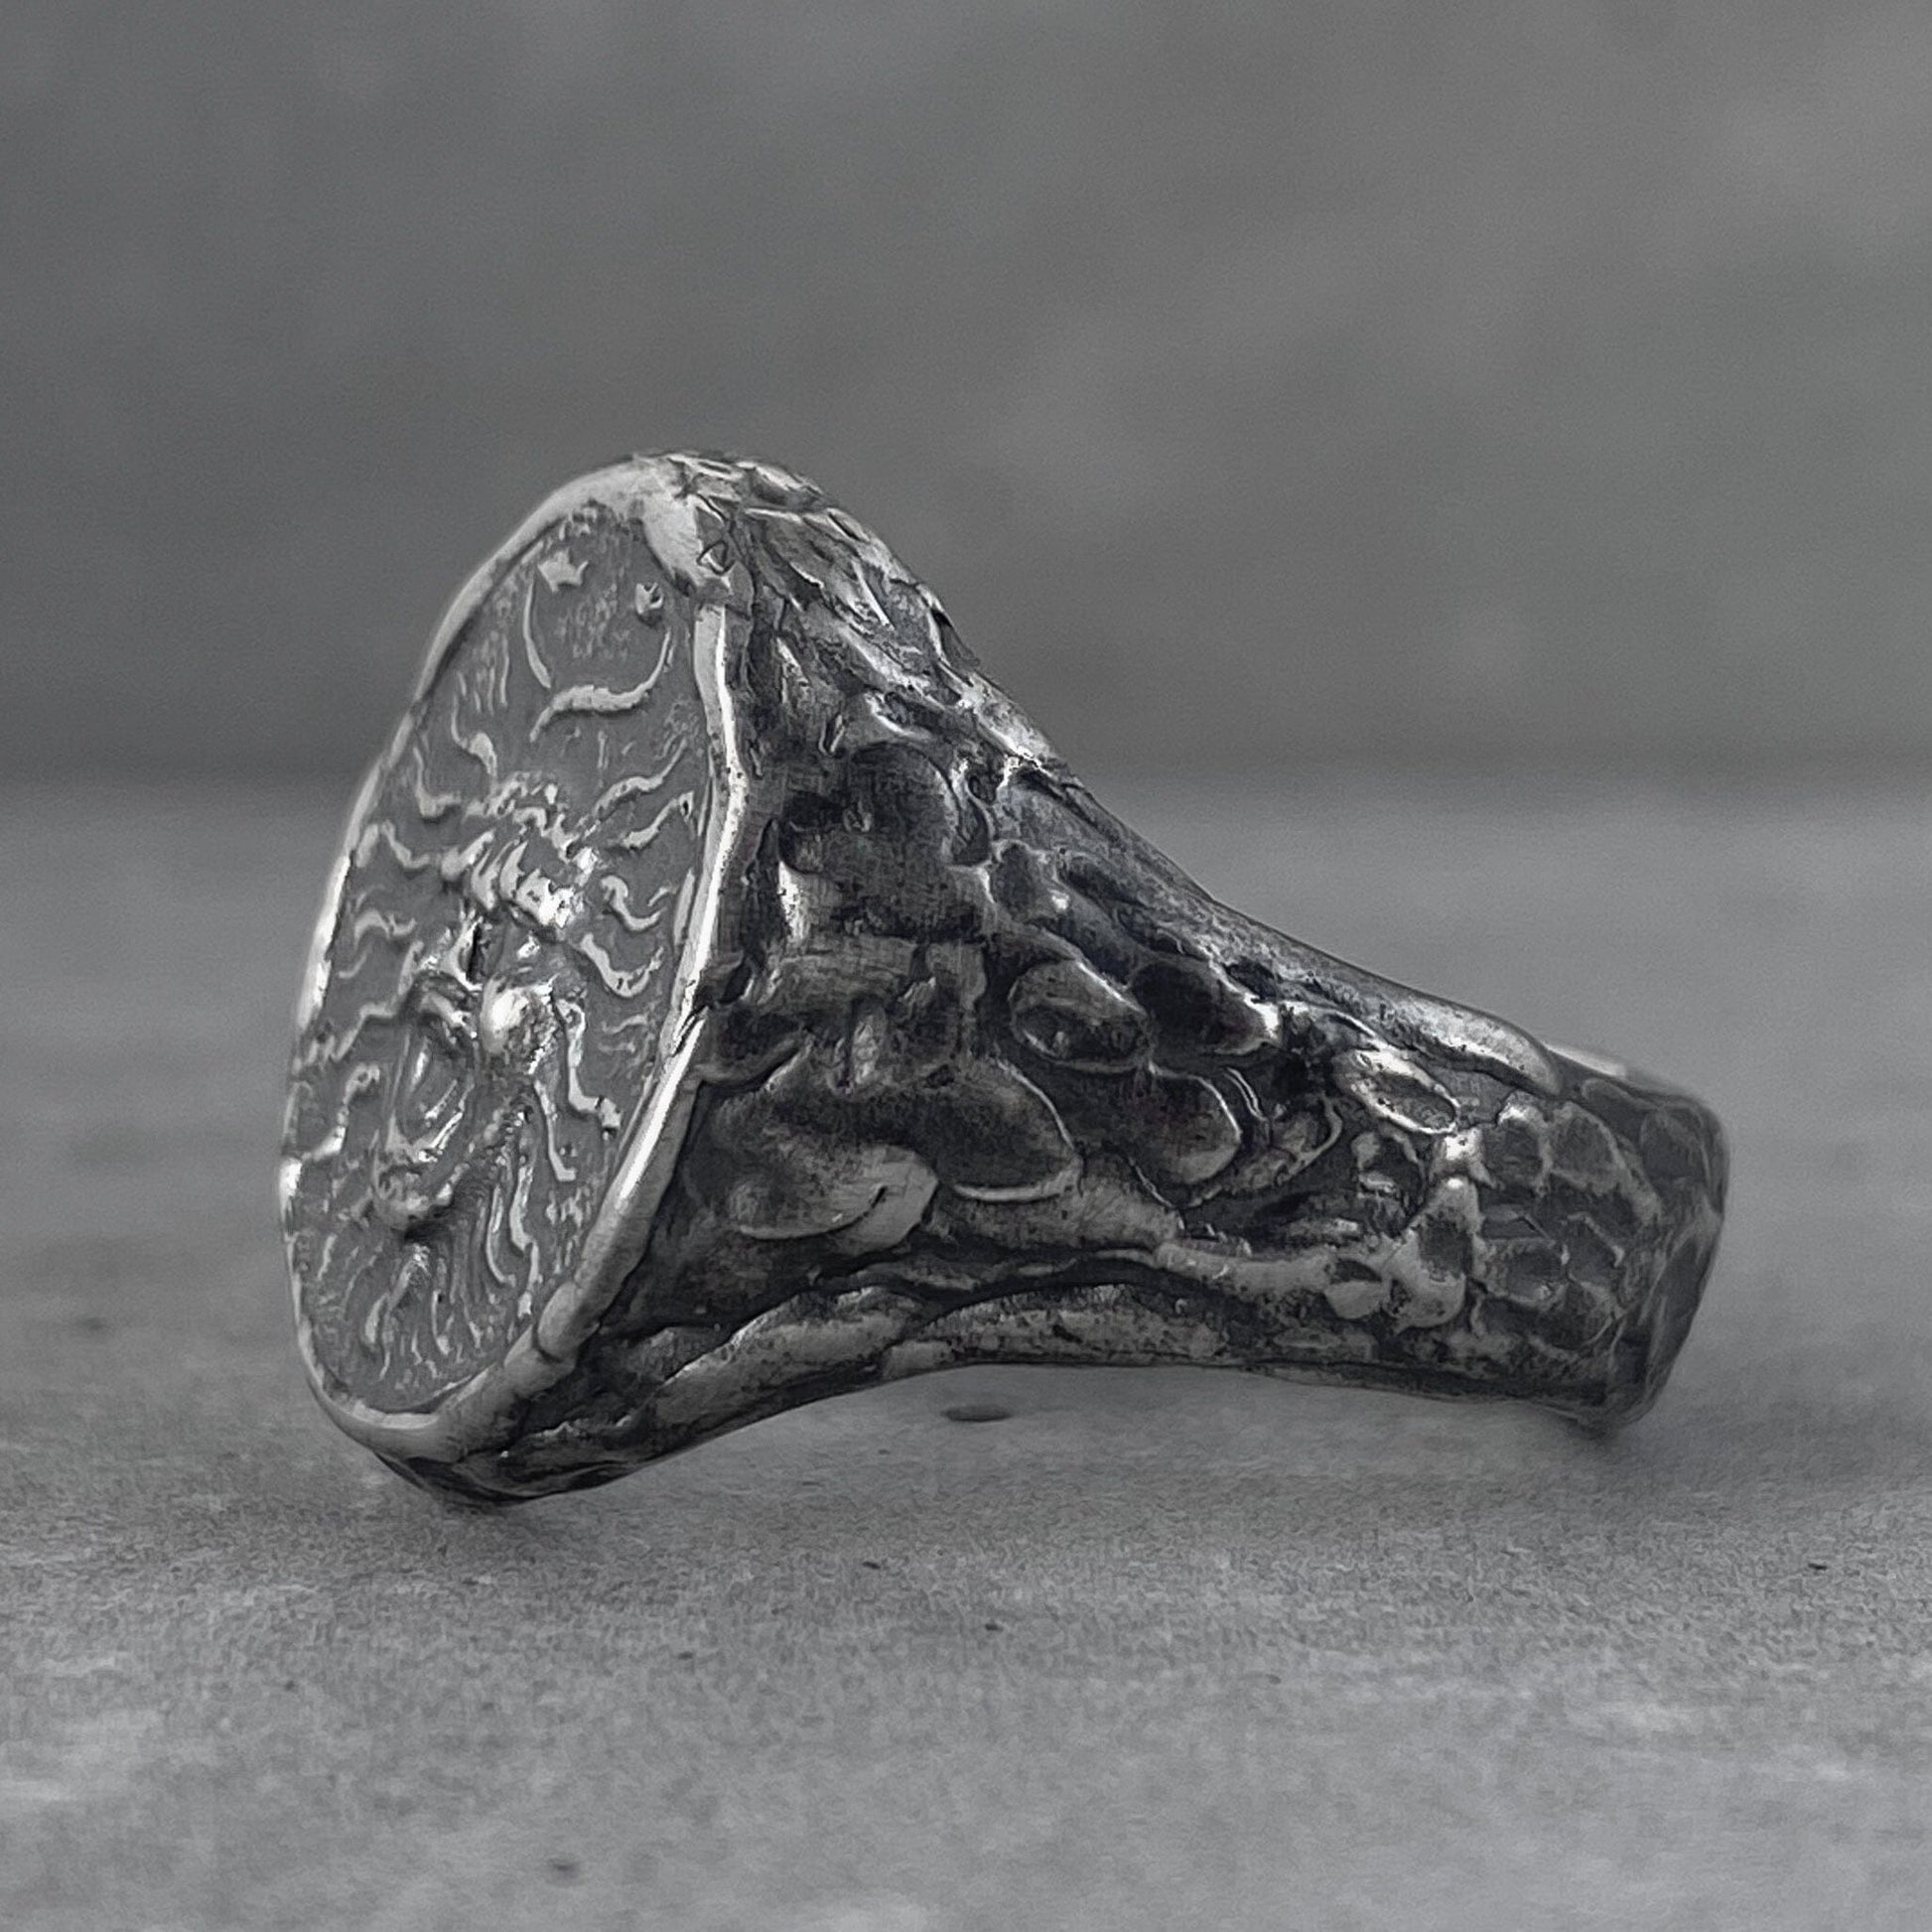 The Medusa ring is an oval signet ring with an unusual fused texture and a portrait of the Gorgon Medusa Unusual rings Project50g 